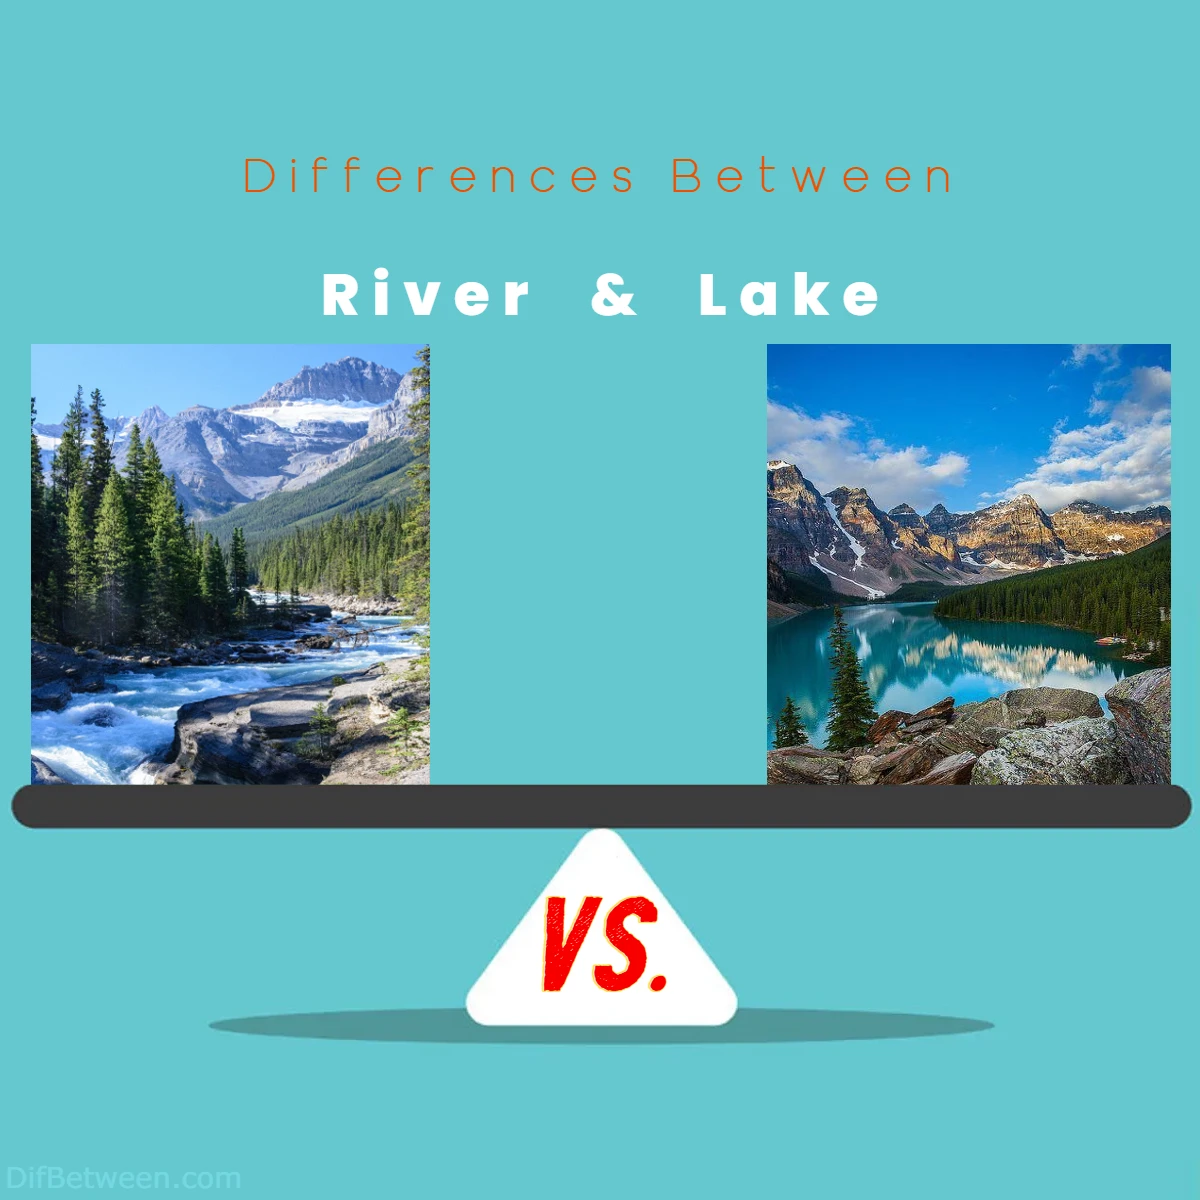 Differences Between River vs Lake